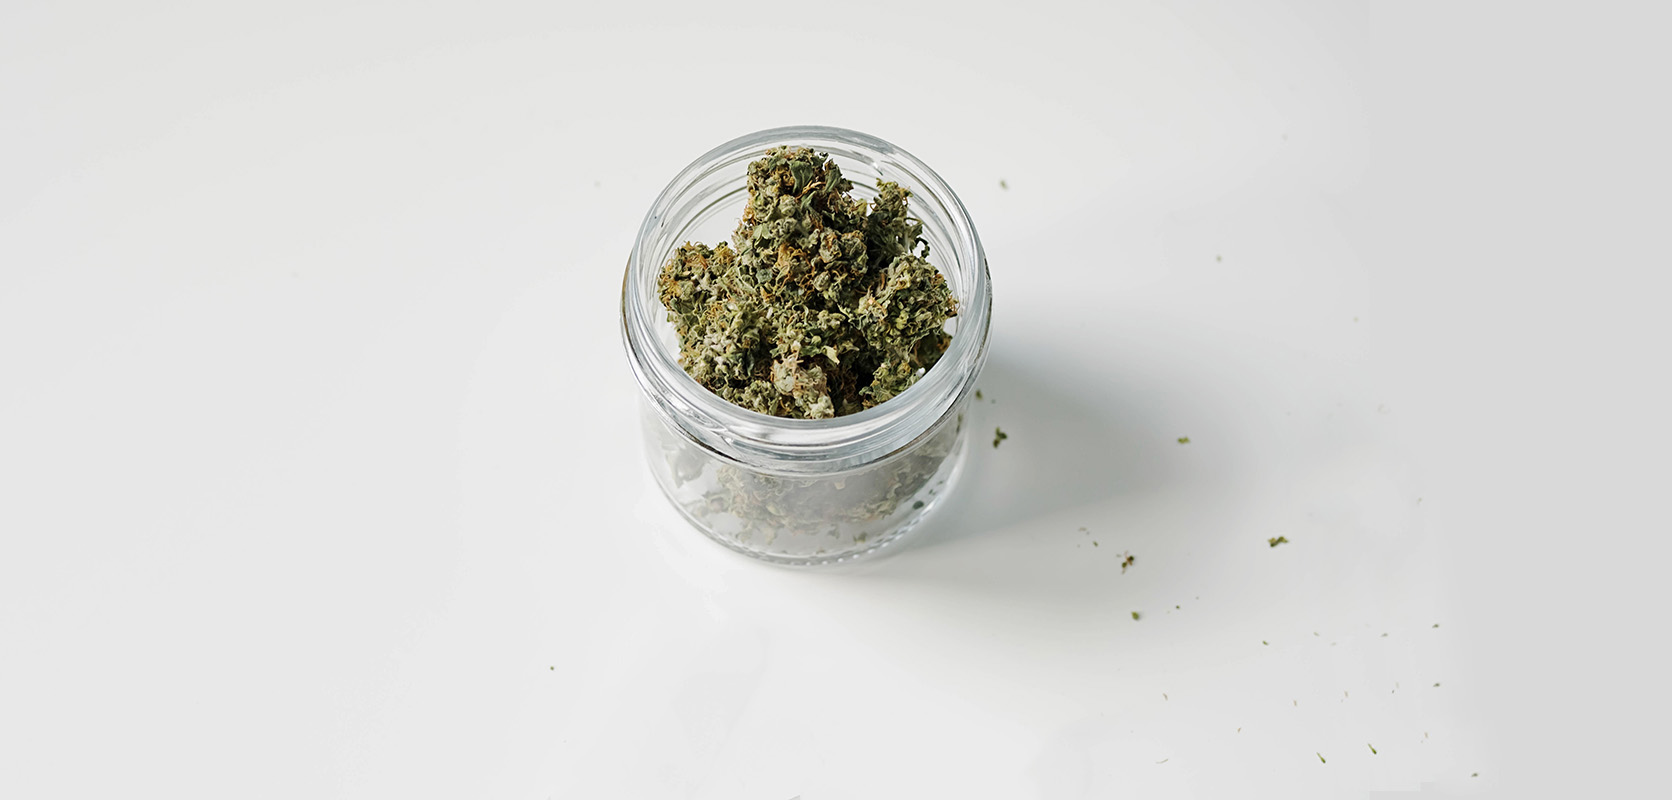 Weed buds stored in a glass jar. buy weeds online. mail order weed canada. weed online.